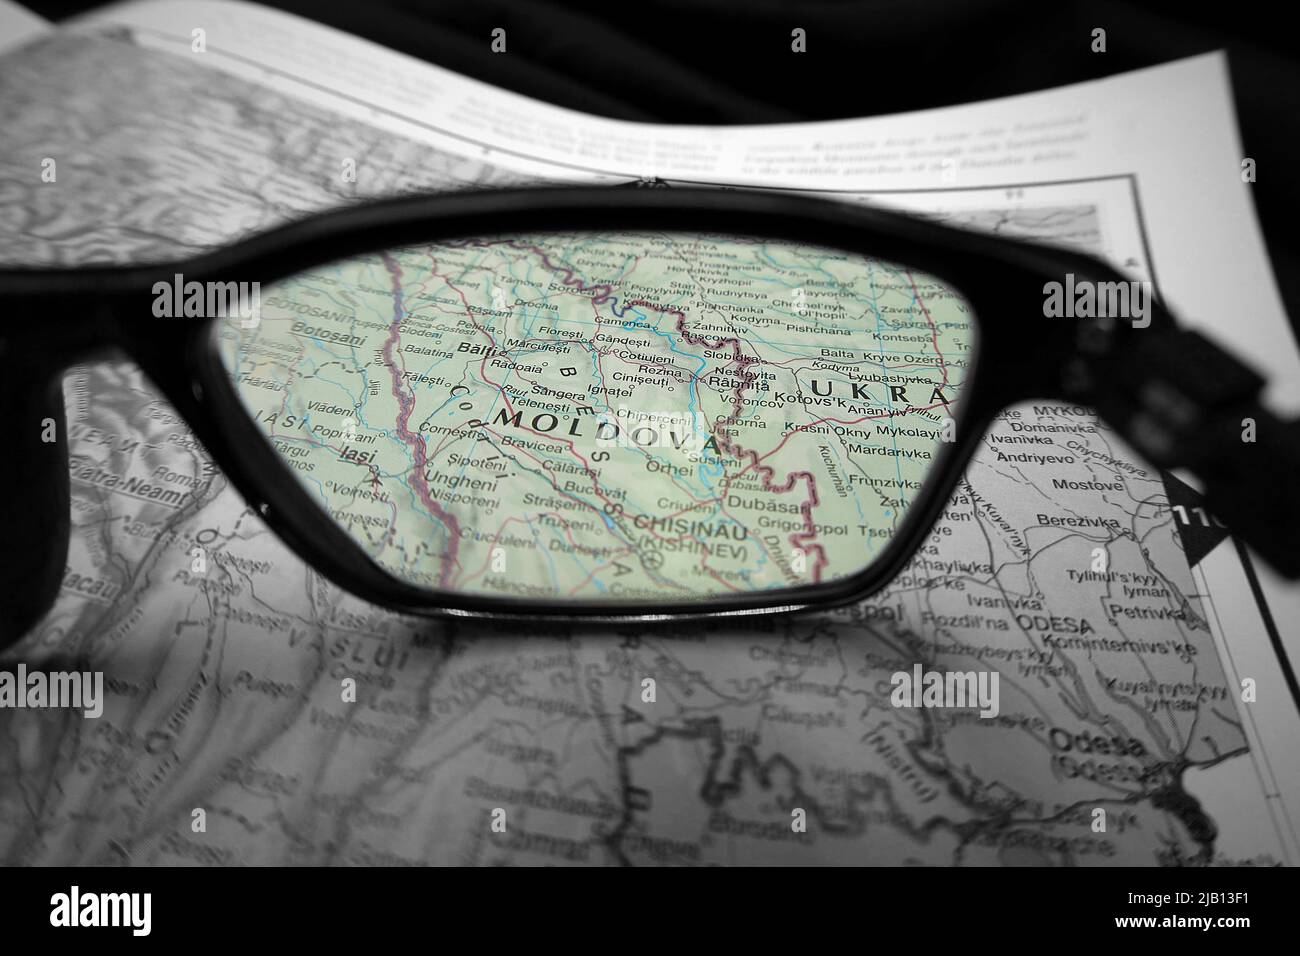 An creative illustrative image showing the country of Moldova on a map through the lens of reading glasses. The area around the word Moldova in colour Stock Photo